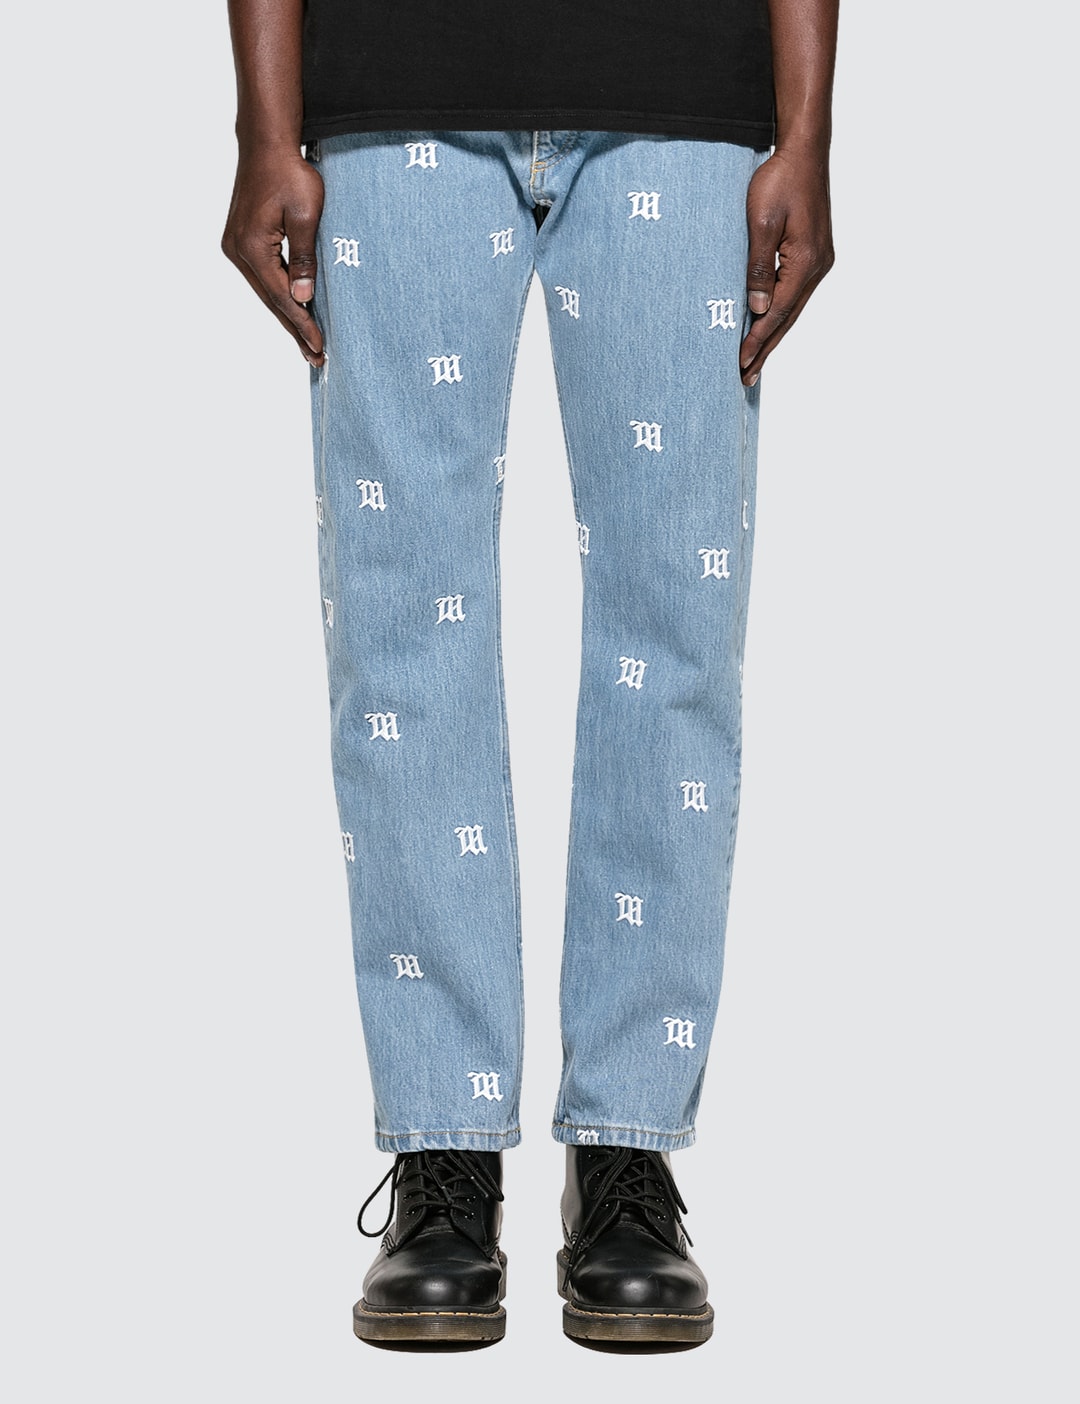 Misbhv - Monogram Denim Pants  HBX - Globally Curated Fashion and